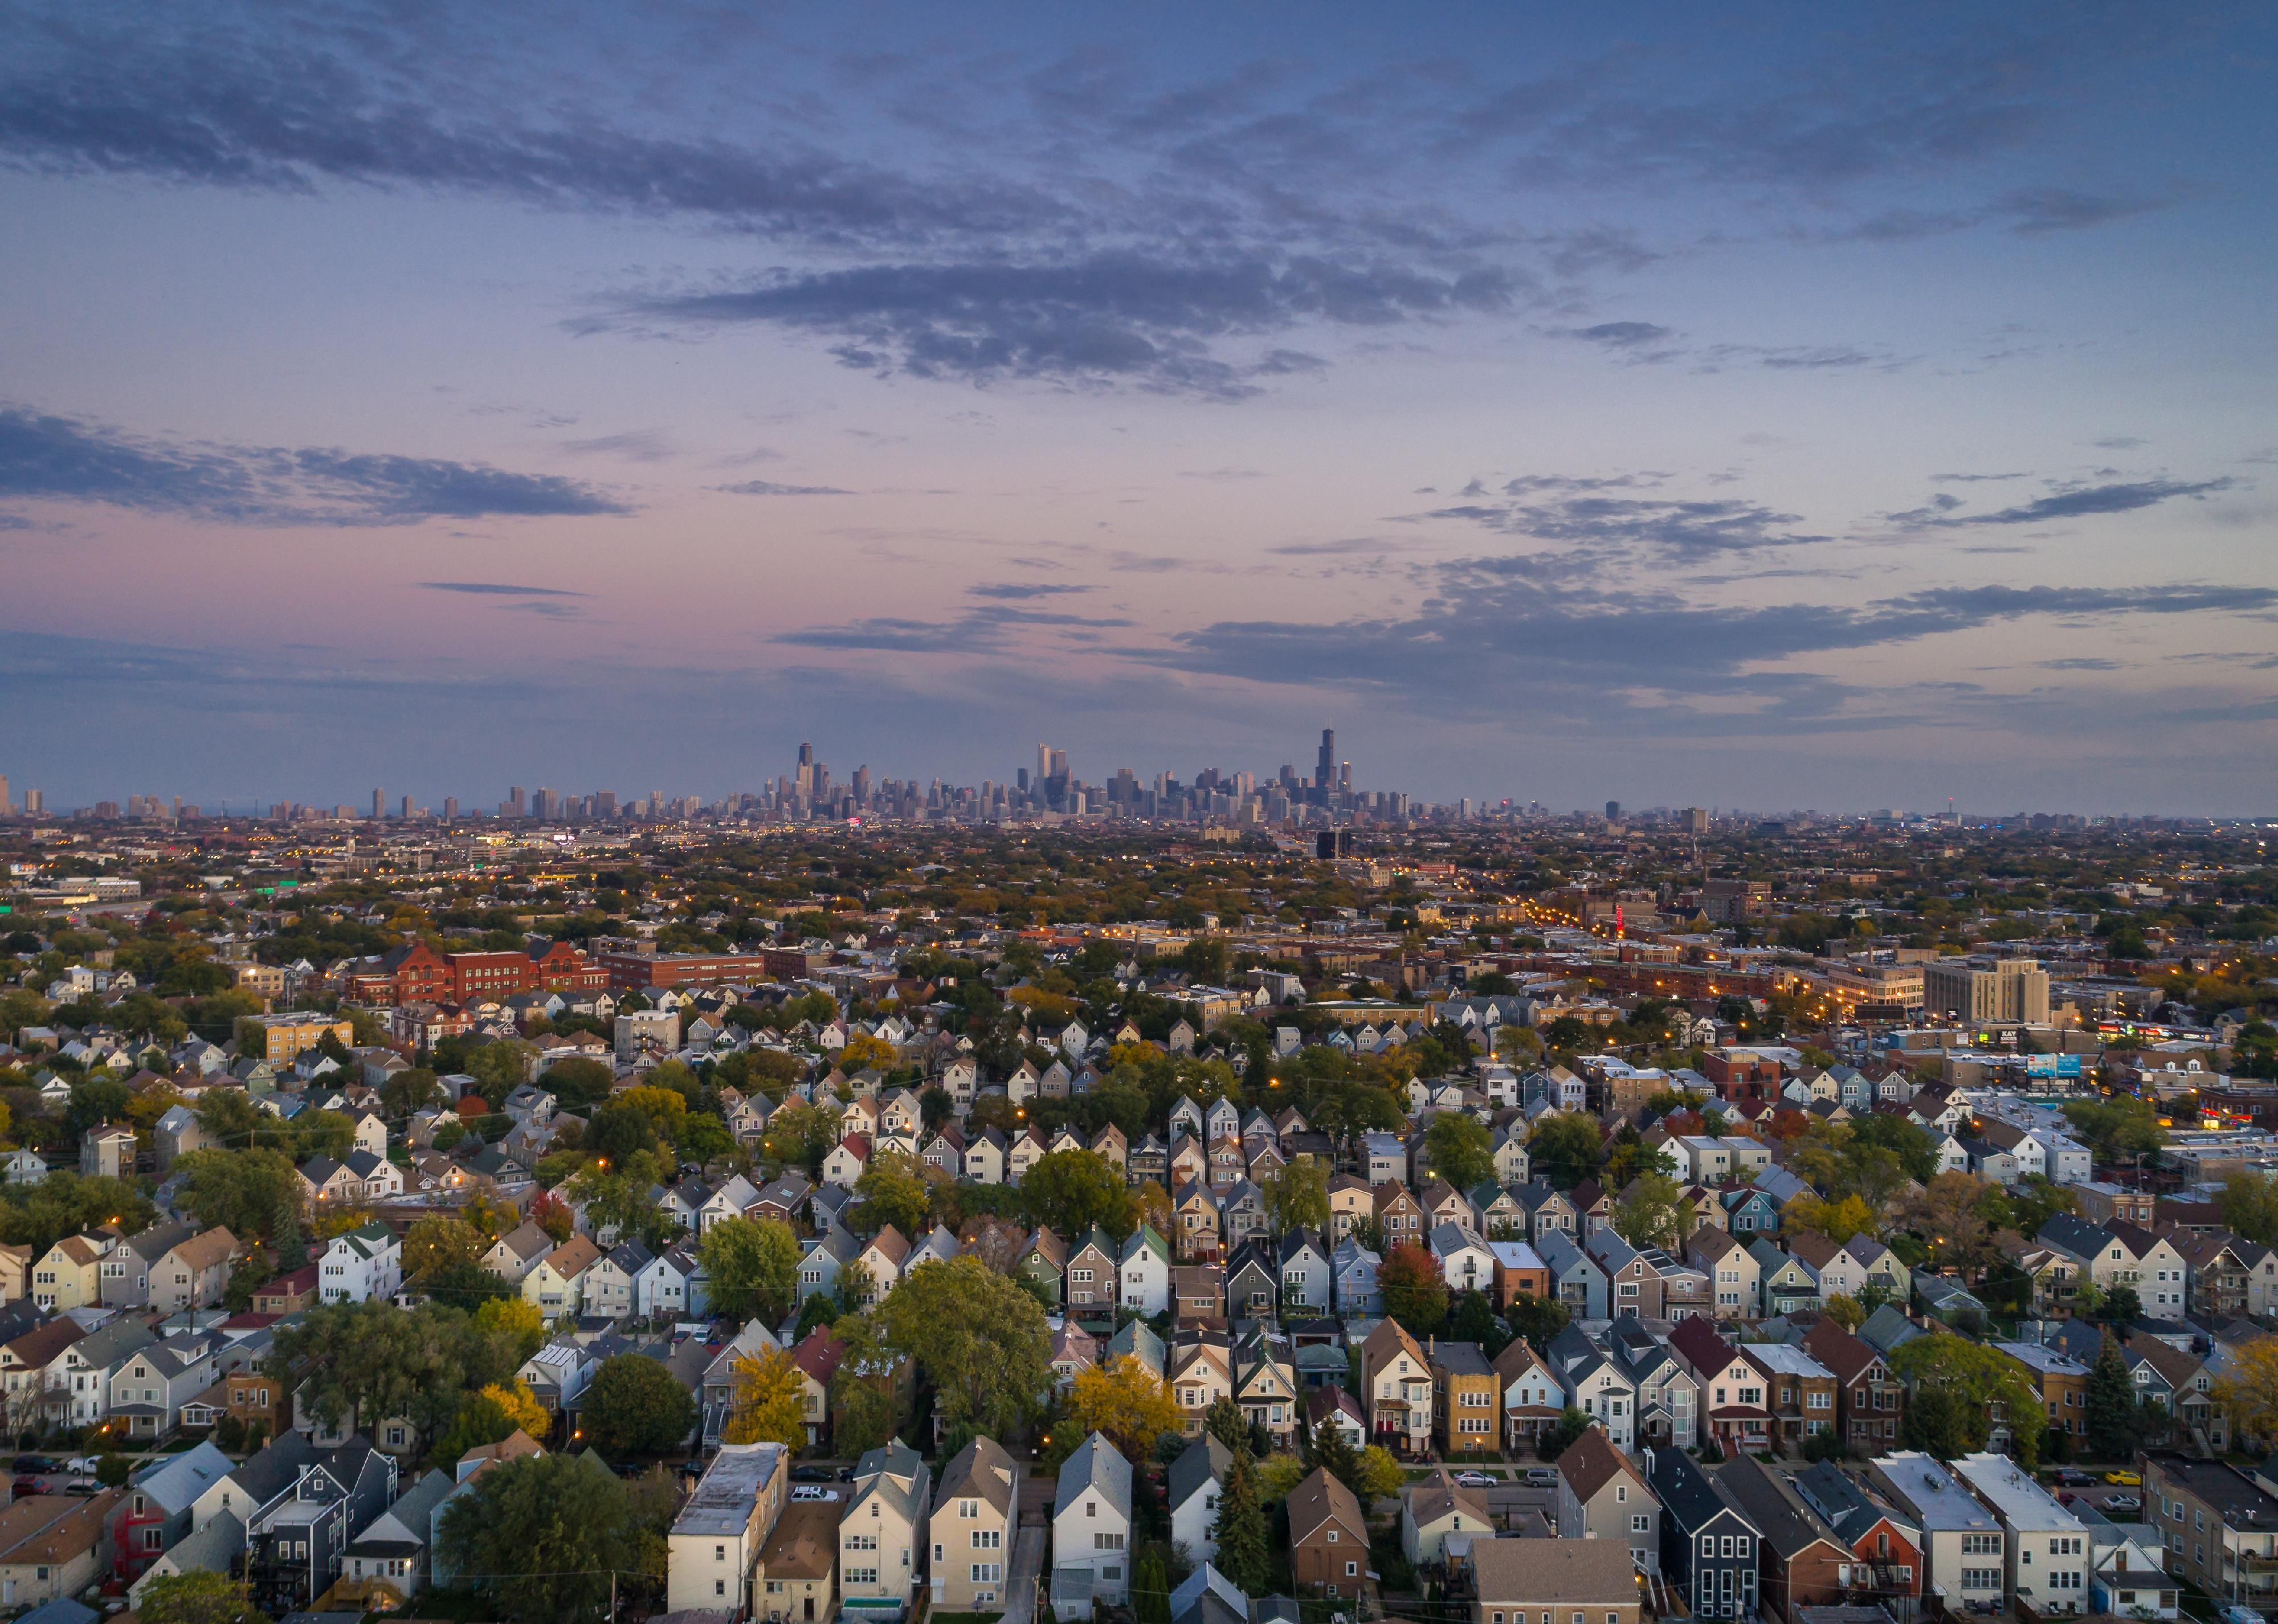 <p>- Population: 1,315<br> - Location: Suburb of Chicago, IL<br> - National rank: 98</p>  <p>The village of Bannockburn is known for its safety and quality education, but the town also has plenty for families to do. The community hosts a series of <a href="https://bannockburn.org/village-events/">free events for residents</a> every year, from wine and cheese tasting to a Halloween haunted trail.</p>